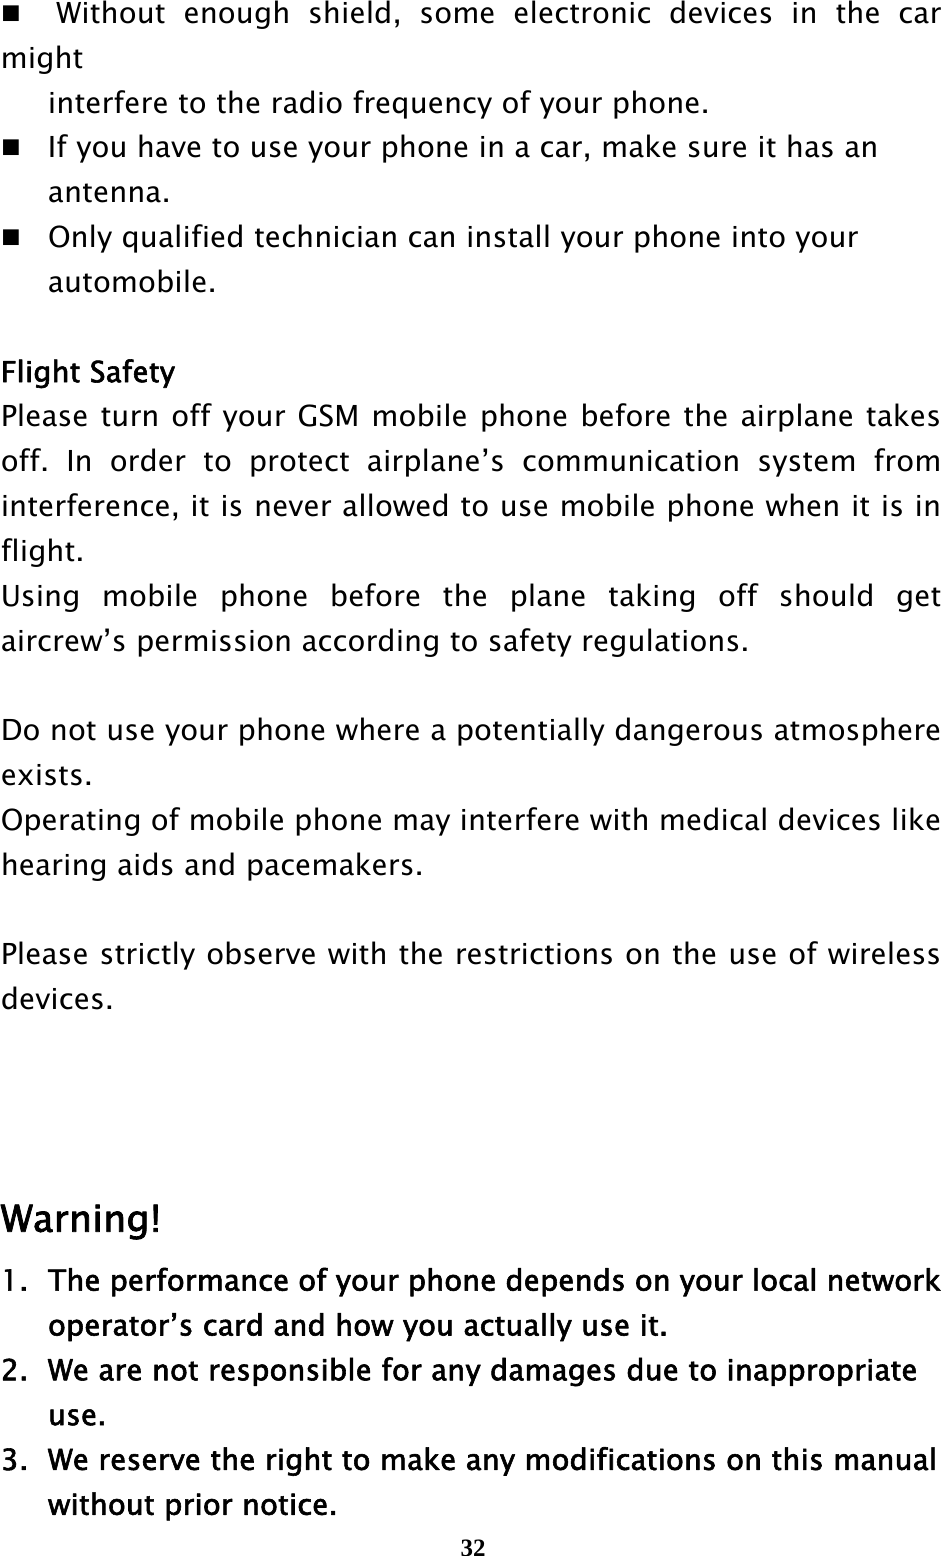  32  Without enough shield, some electronic devices in the car might    interfere to the radio frequency of your phone.   If you have to use your phone in a car, make sure it has an    antenna.  Only qualified technician can install your phone into your    automobile.  Flight Safety Please turn off your GSM mobile phone before the airplane takes off. In order to protect airplane’s communication system from interference, it is never allowed to use mobile phone when it is in flight.  Using mobile phone before the plane taking off should get aircrew’s permission according to safety regulations.  Do not use your phone where a potentially dangerous atmosphere exists. Operating of mobile phone may interfere with medical devices like hearing aids and pacemakers.    Please strictly observe with the restrictions on the use of wireless devices.     Warning! 1.  The performance of your phone depends on your local network     operator’s card and how you actually use it. 2.   We are not responsible for any damages due to inappropriate    use.  3.   We reserve the right to make any modifications on this manual     without prior notice. 